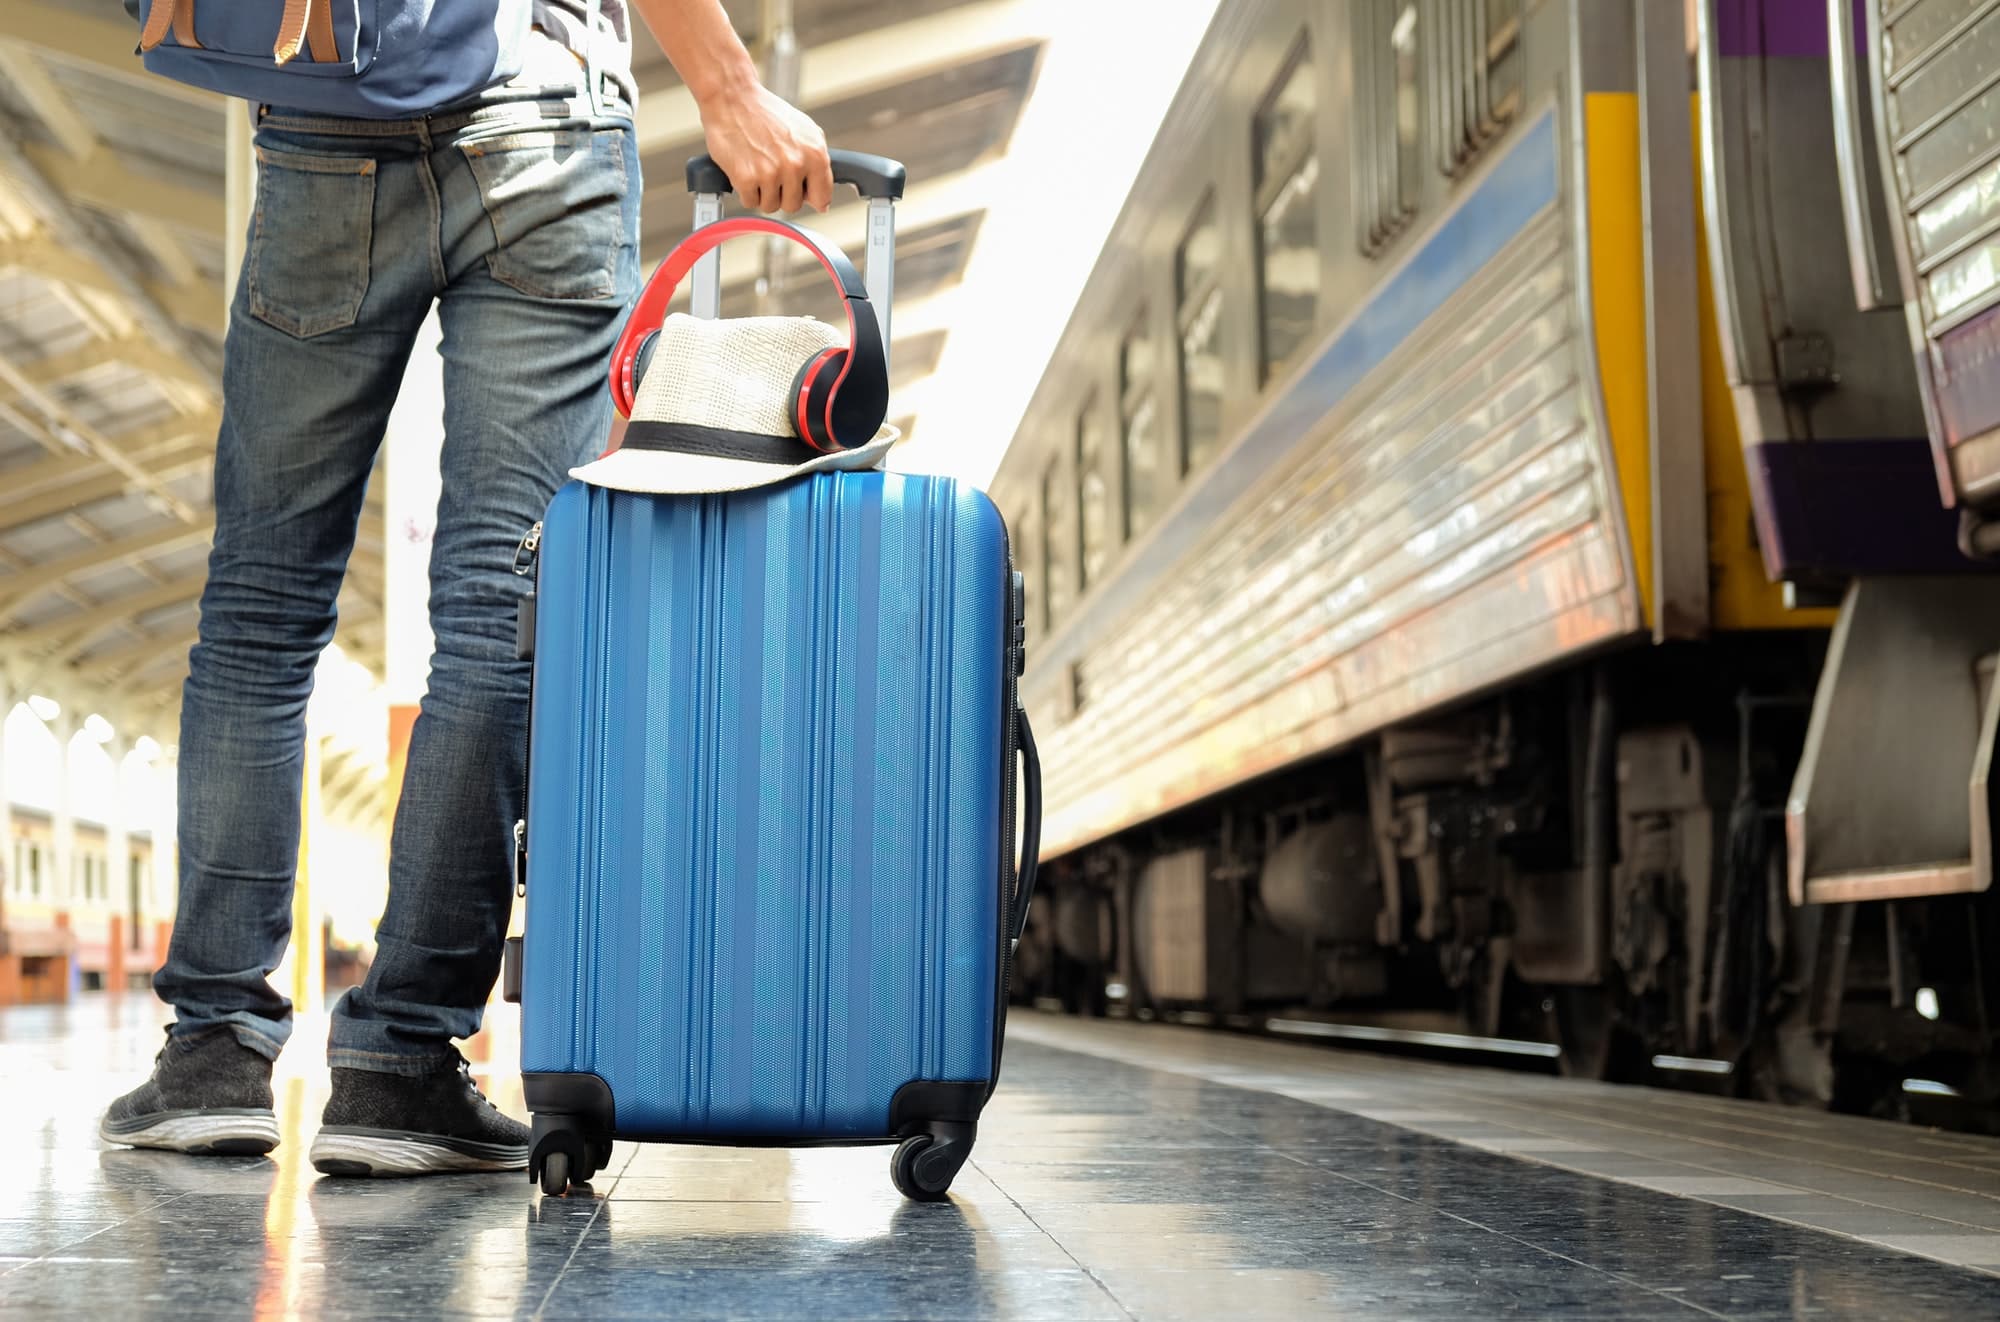 traveler with a blue suitcase is waiting for the train hat and headphone placed on the suitcase